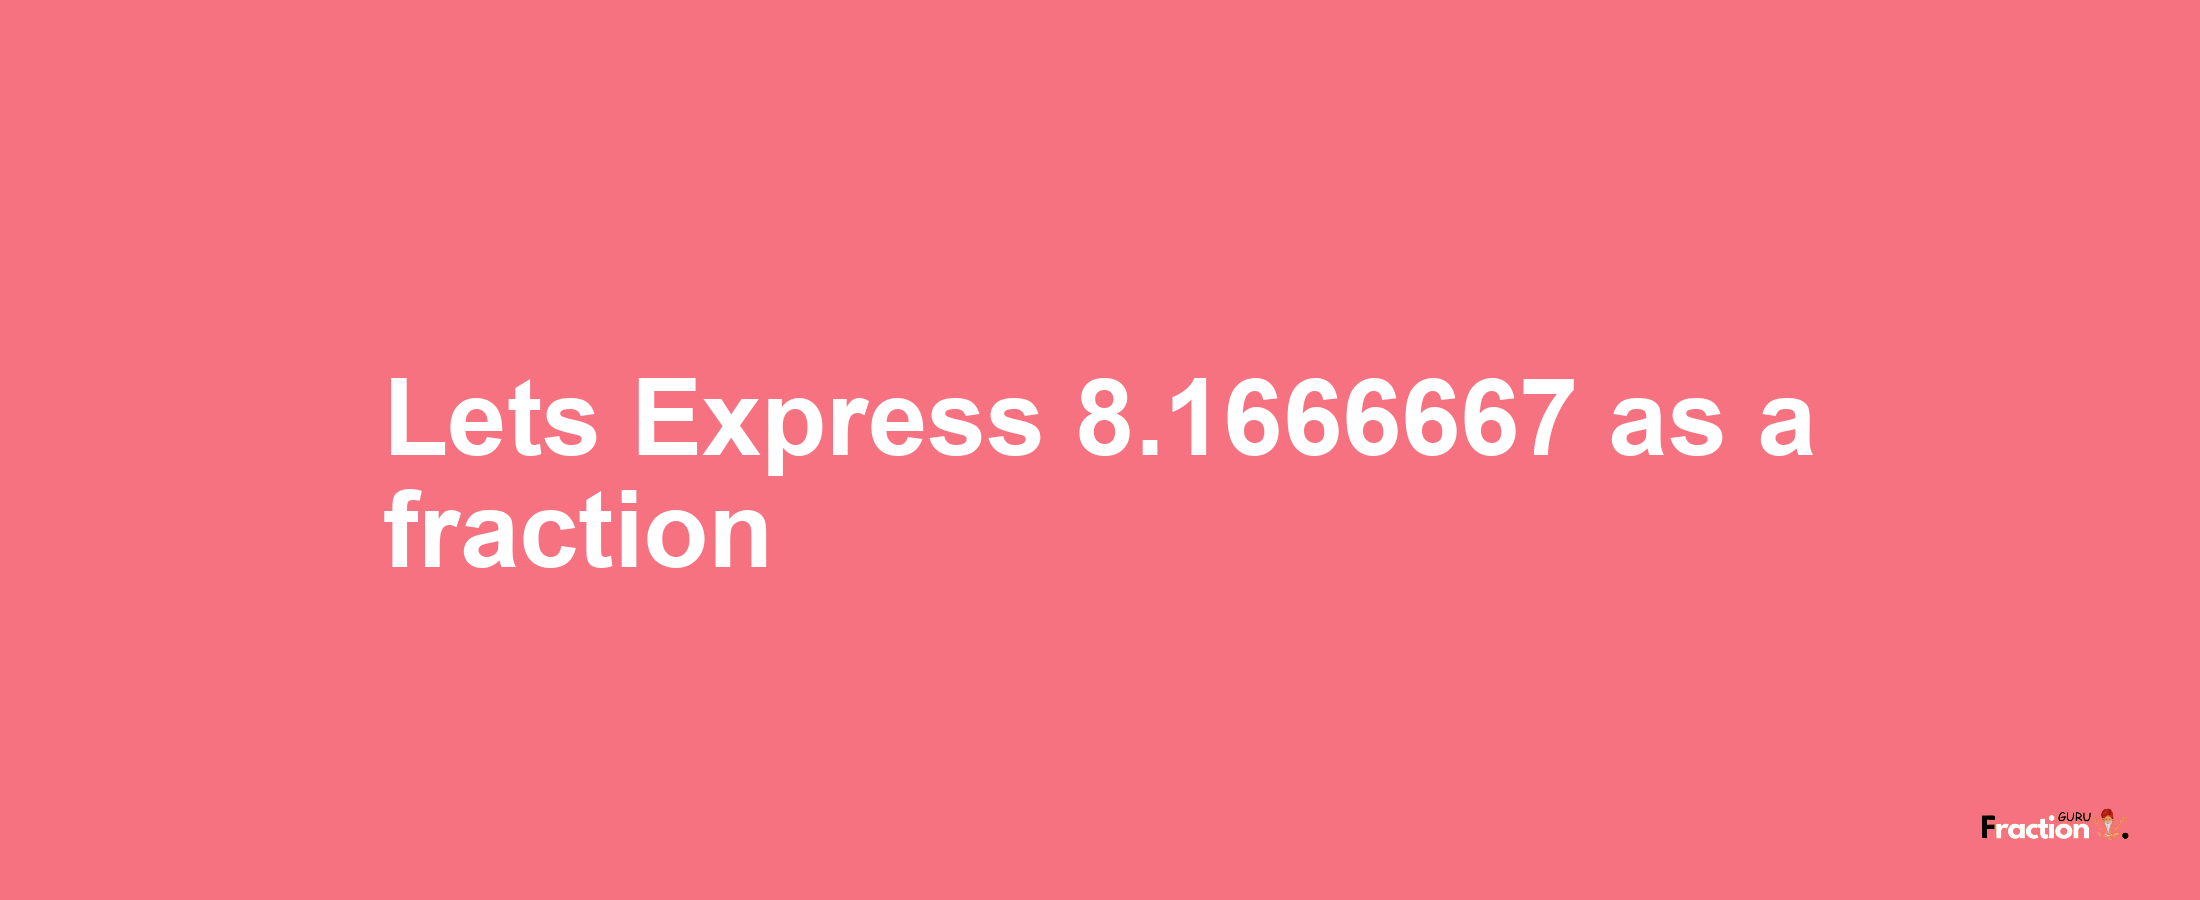 Lets Express 8.1666667 as afraction